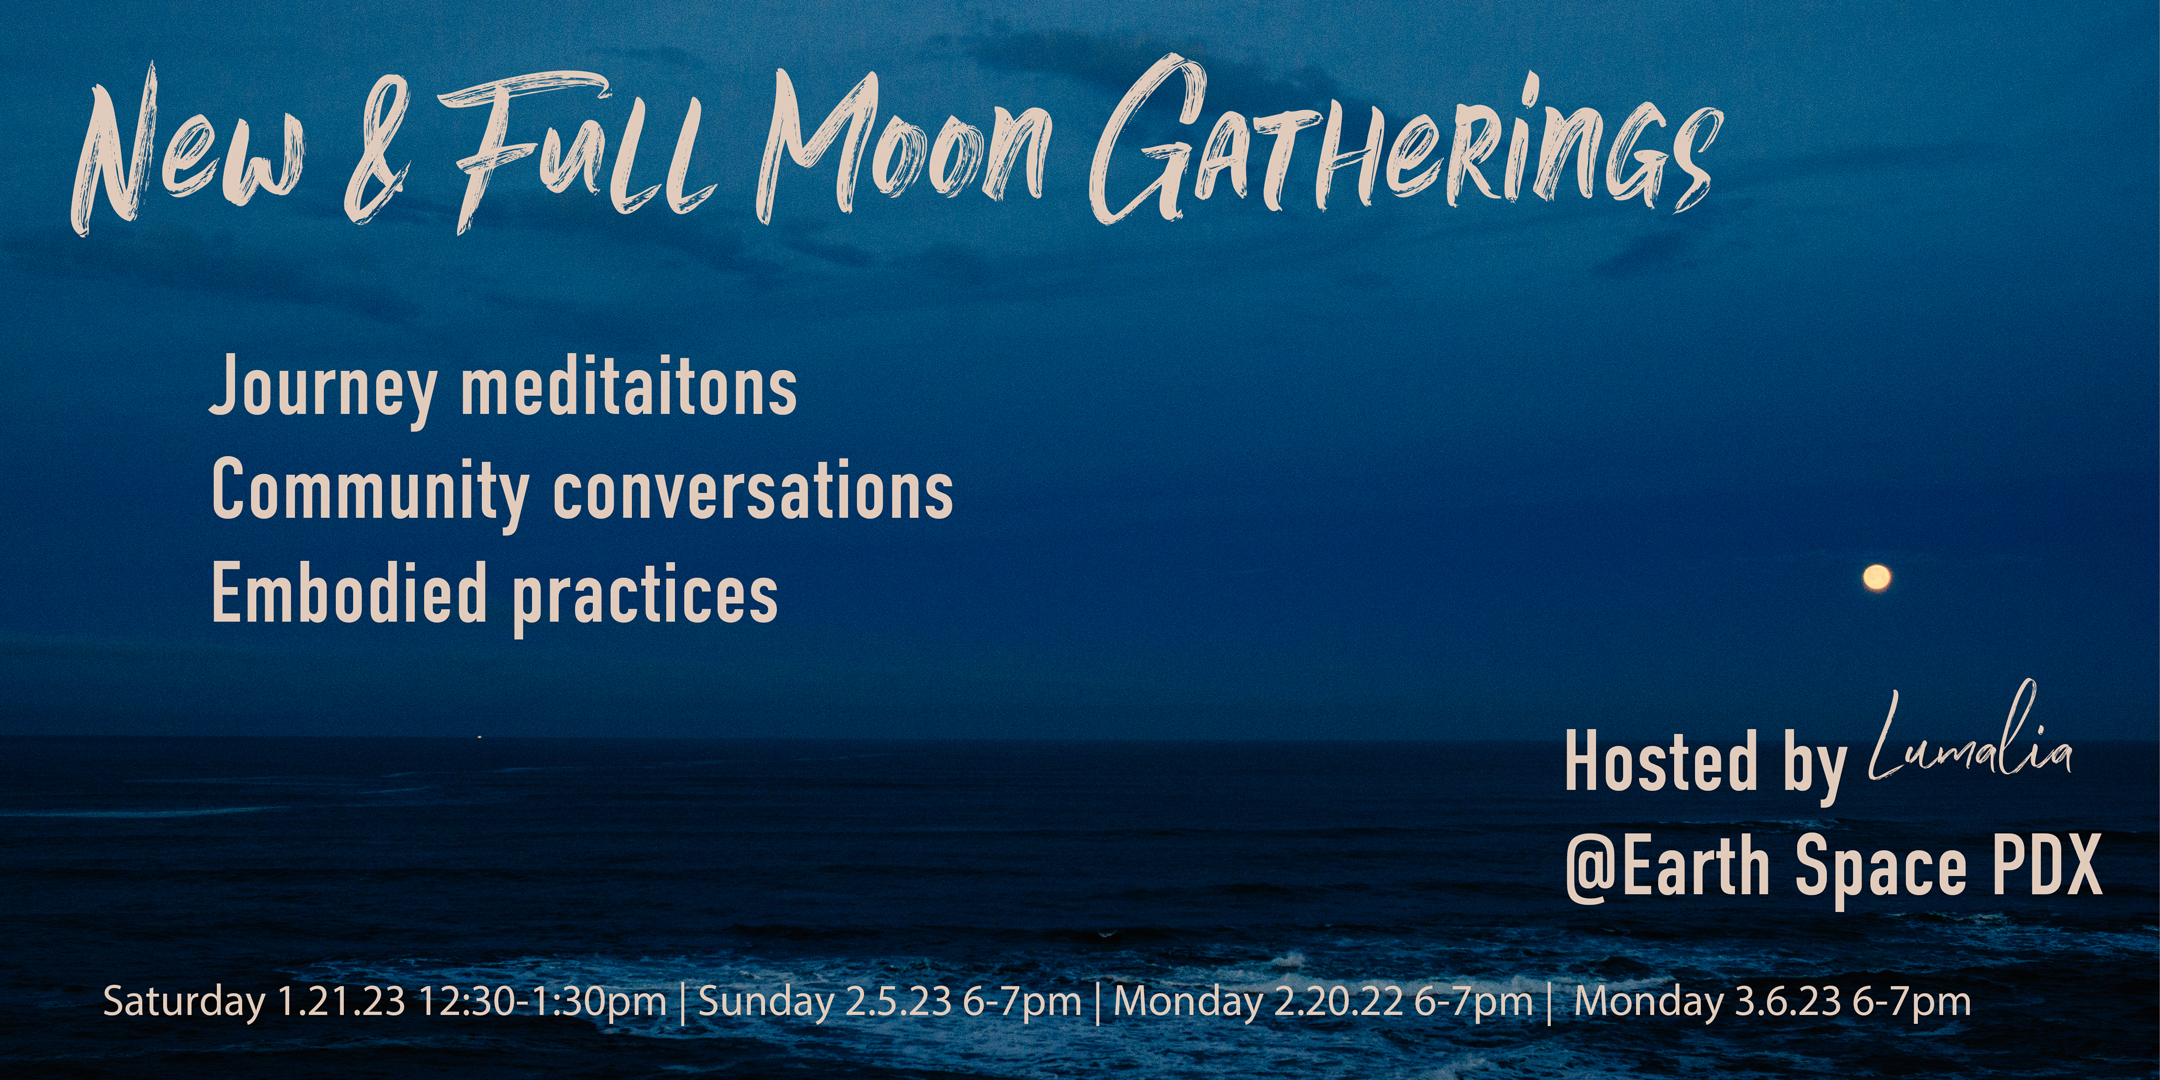 "new & full moon gatherings journey meditations, community conversations, embodied practices, hosted by Lumalia @earth space pdx Saturday 1.21.23 12:30-1:30pm Sunday 2.5.23 6-7pm Monday 2.20.22 6-7pm Monday 3.6.23 6-7pm" image of full moon over an ocean at night